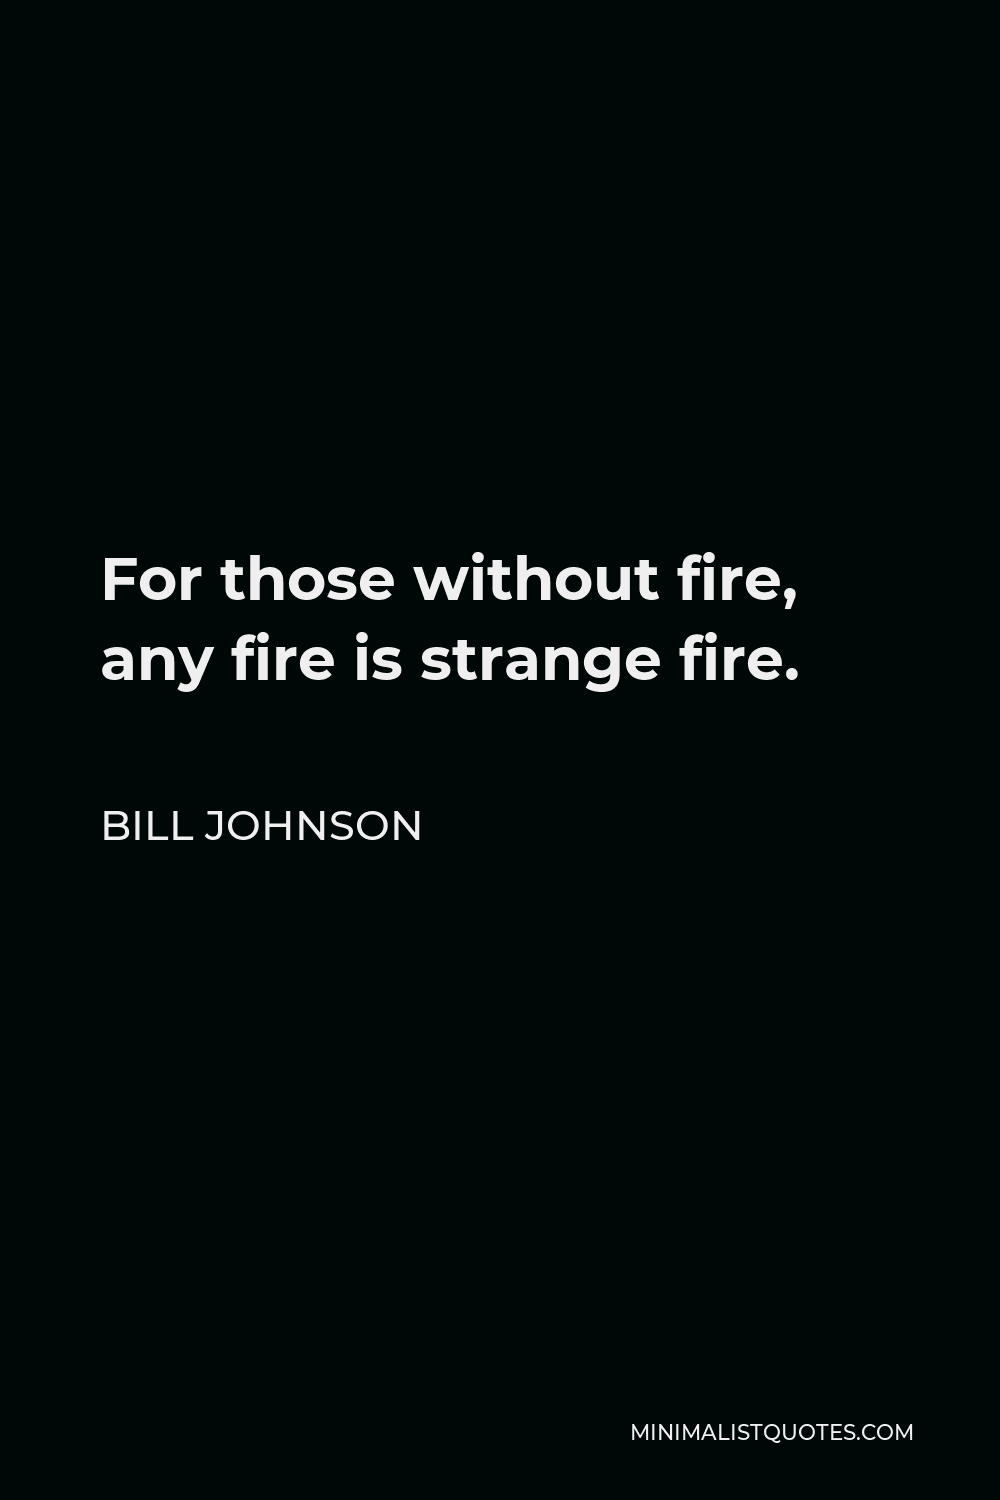 Bill Johnson Quote - For those without fire, any fire is strange fire.